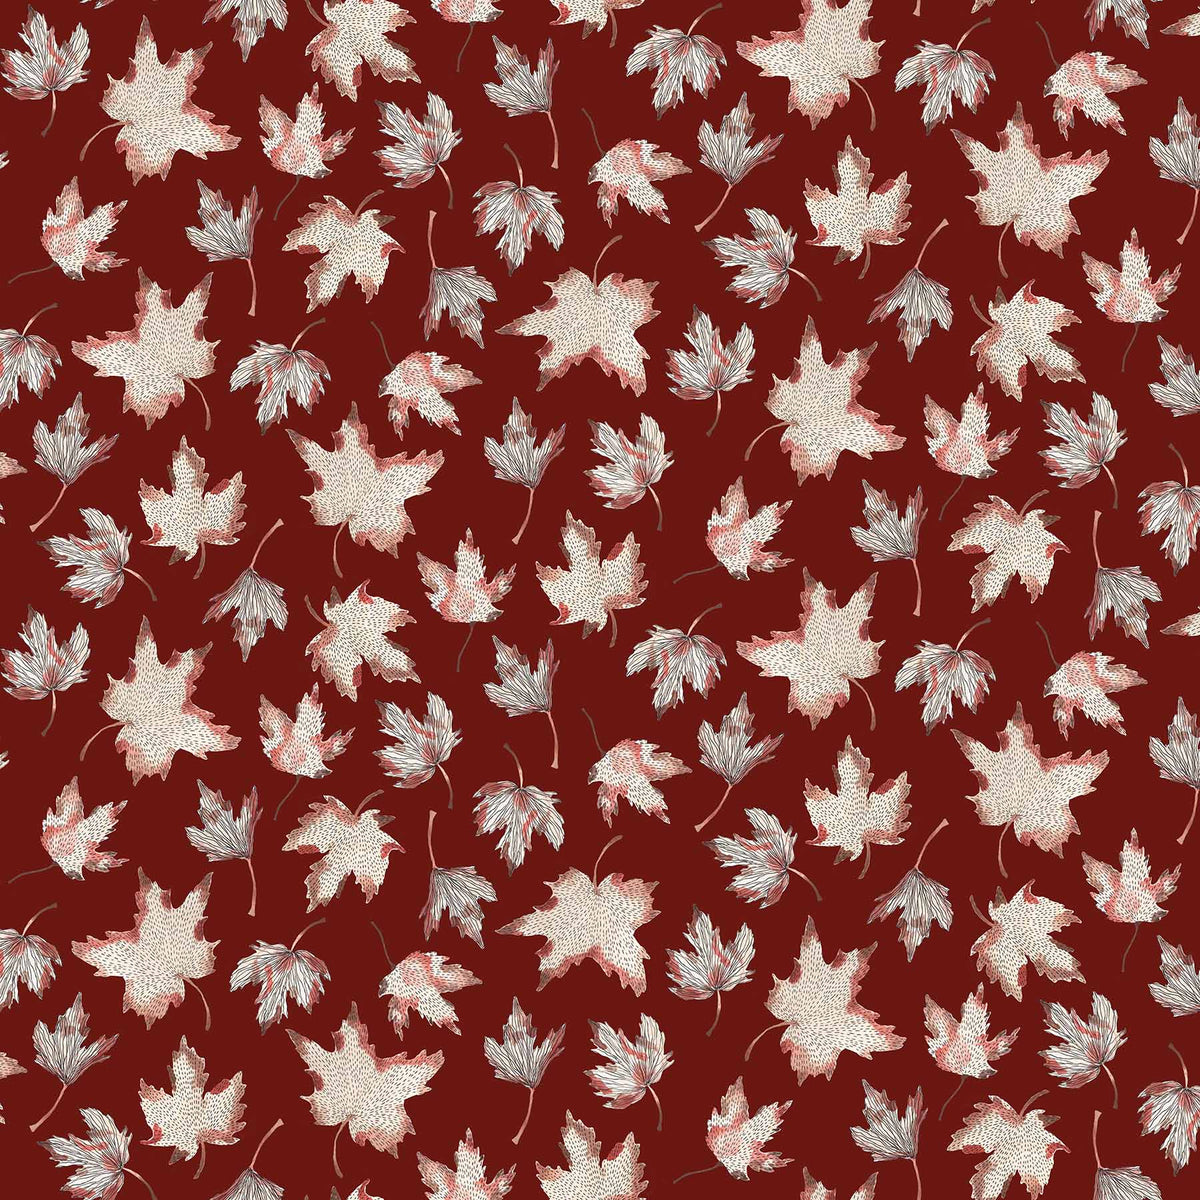 After the Rain Quilt Fabric - Maple Leaves on Mulberry Brown - 90162 29